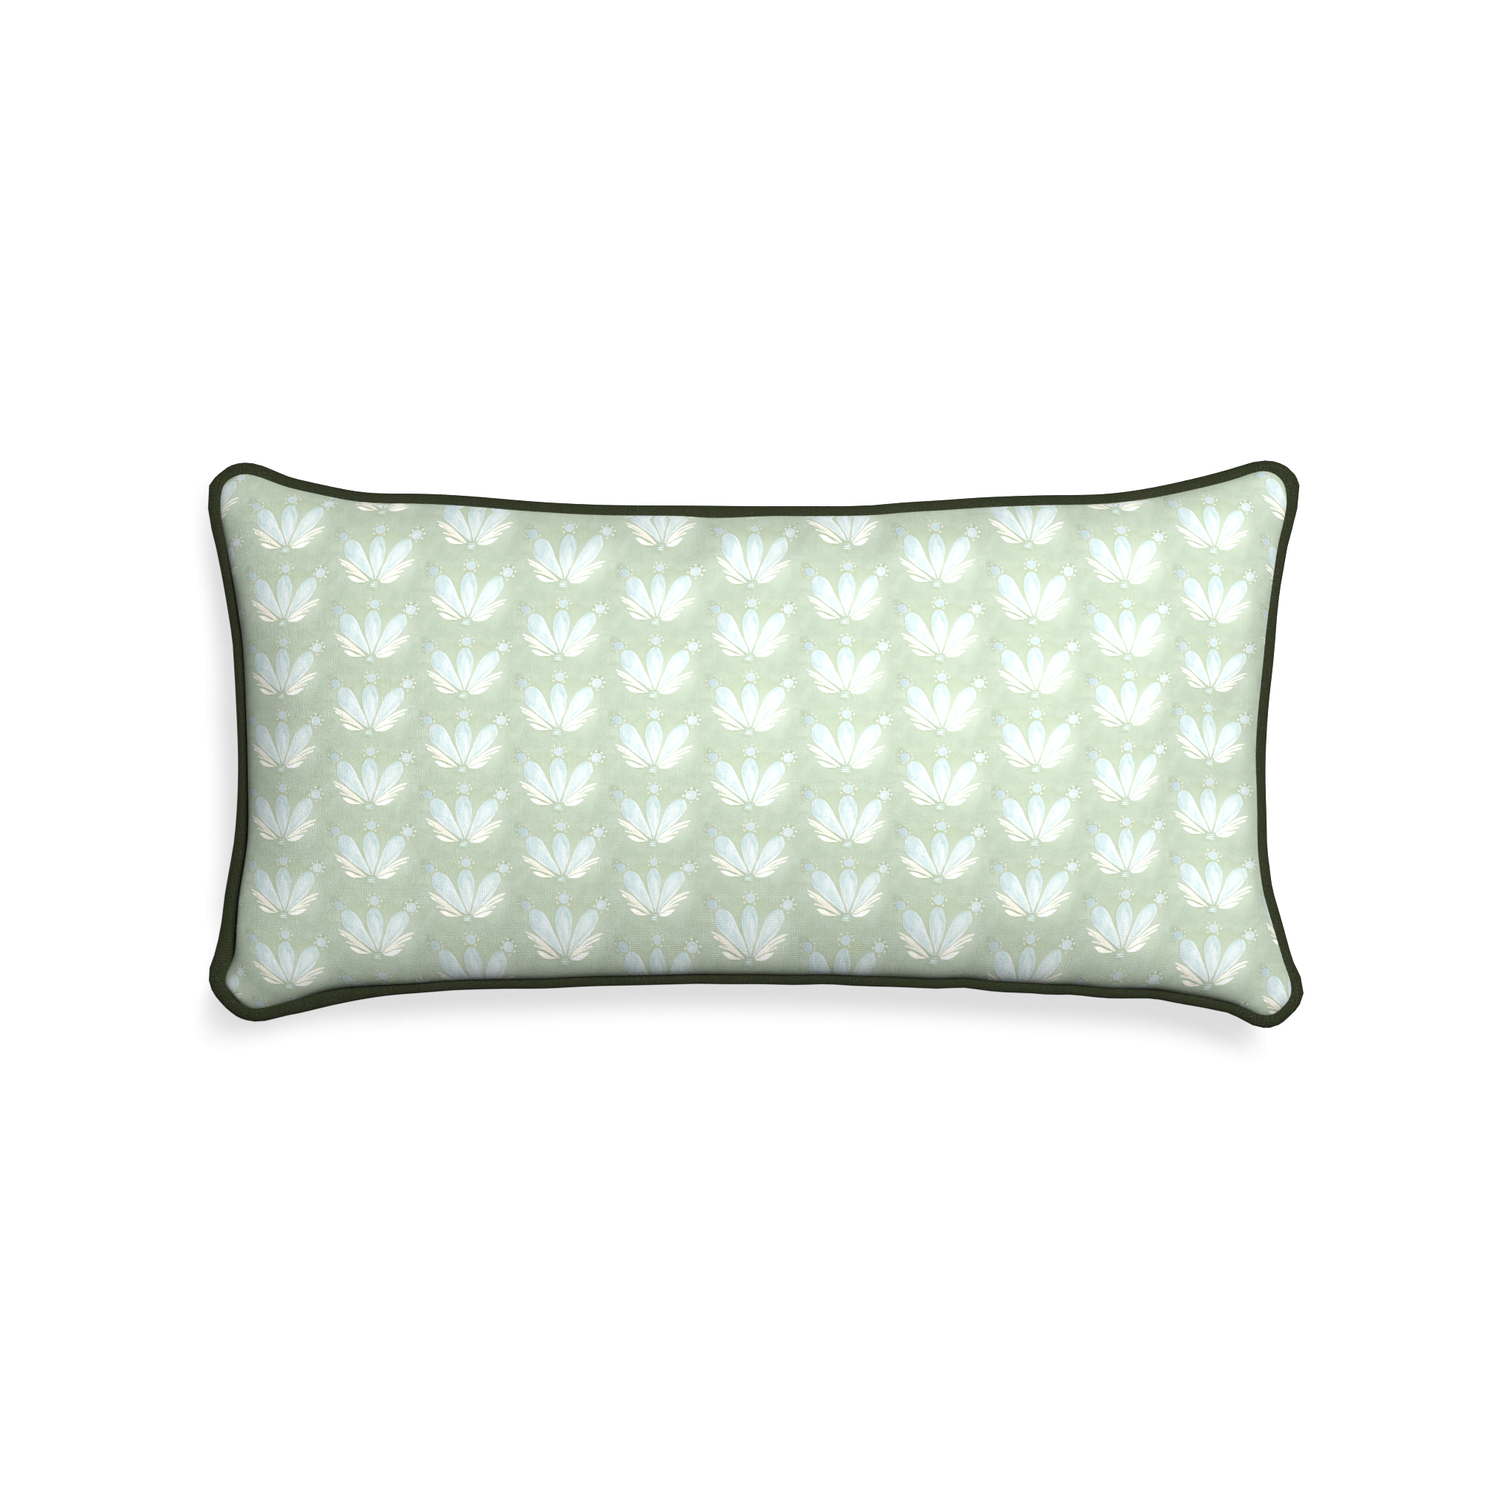 Midi-lumbar serena sea salt custom blue & green floral drop repeatpillow with f piping on white background